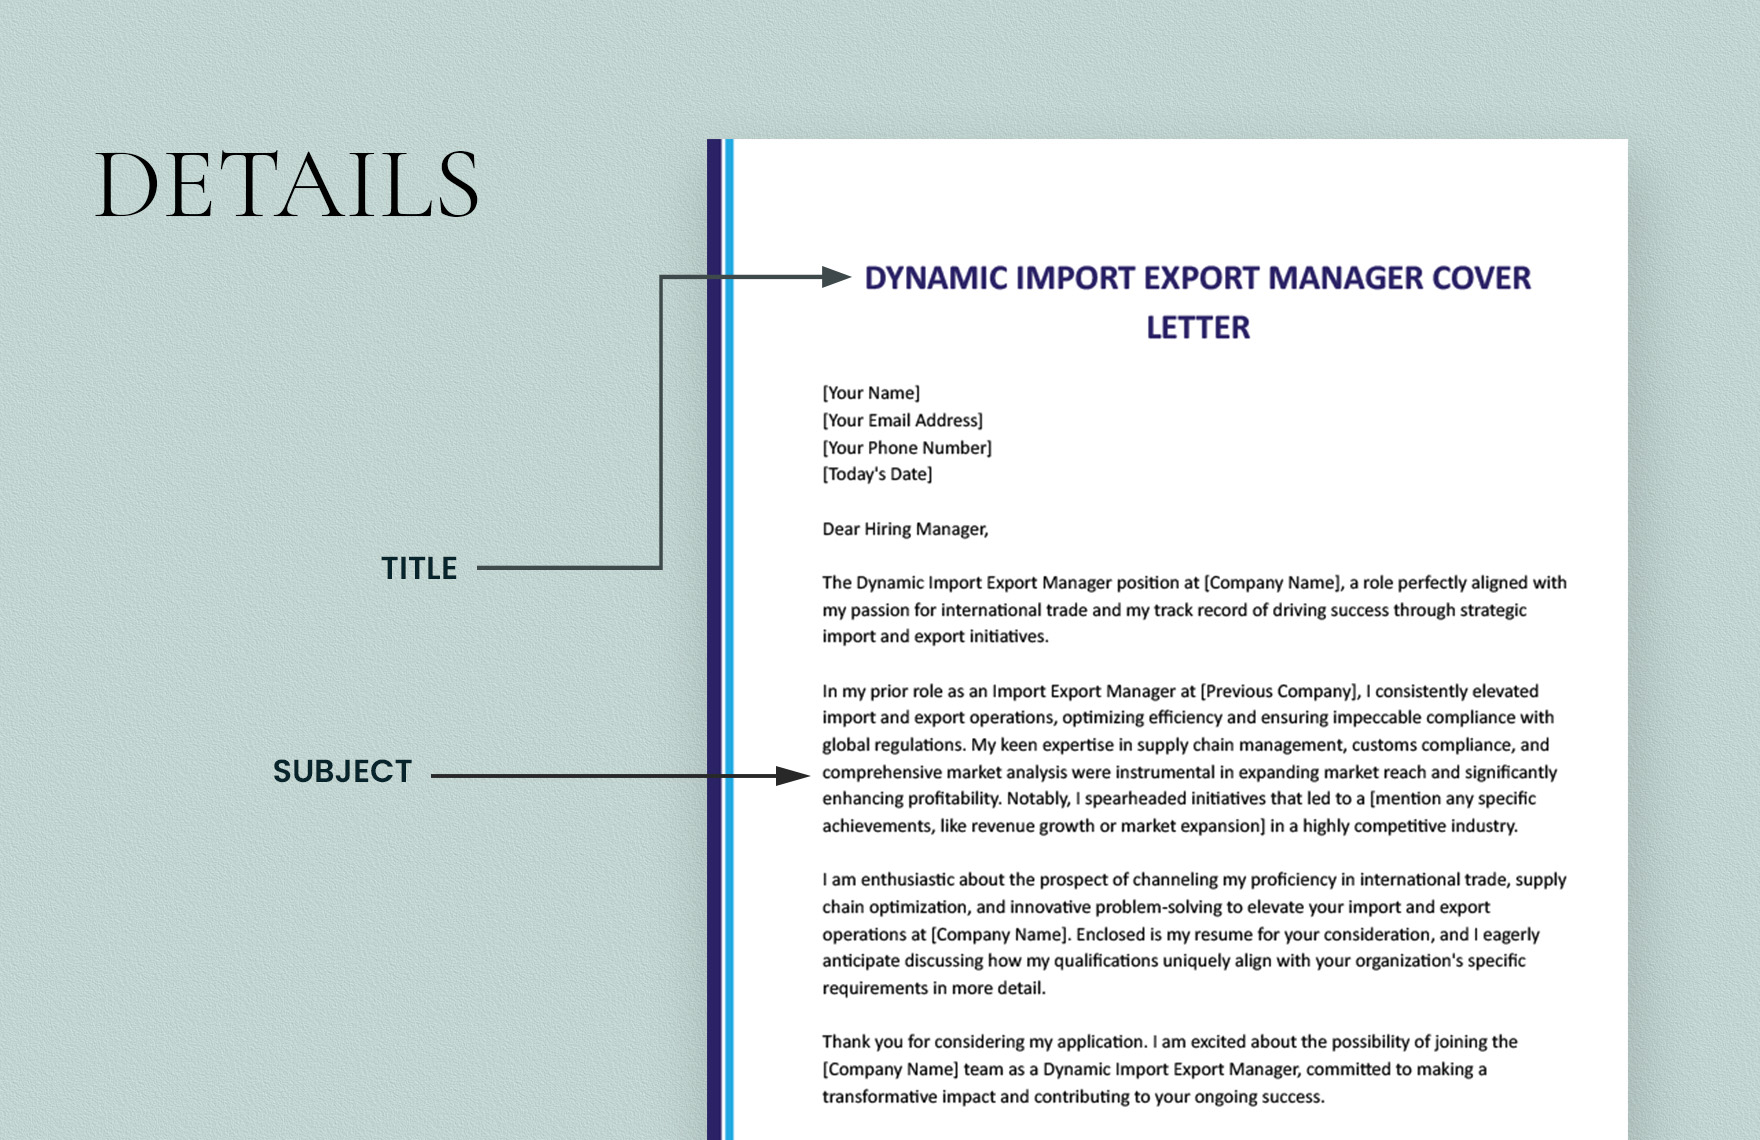 Dynamic Import Export Manager Cover Letter